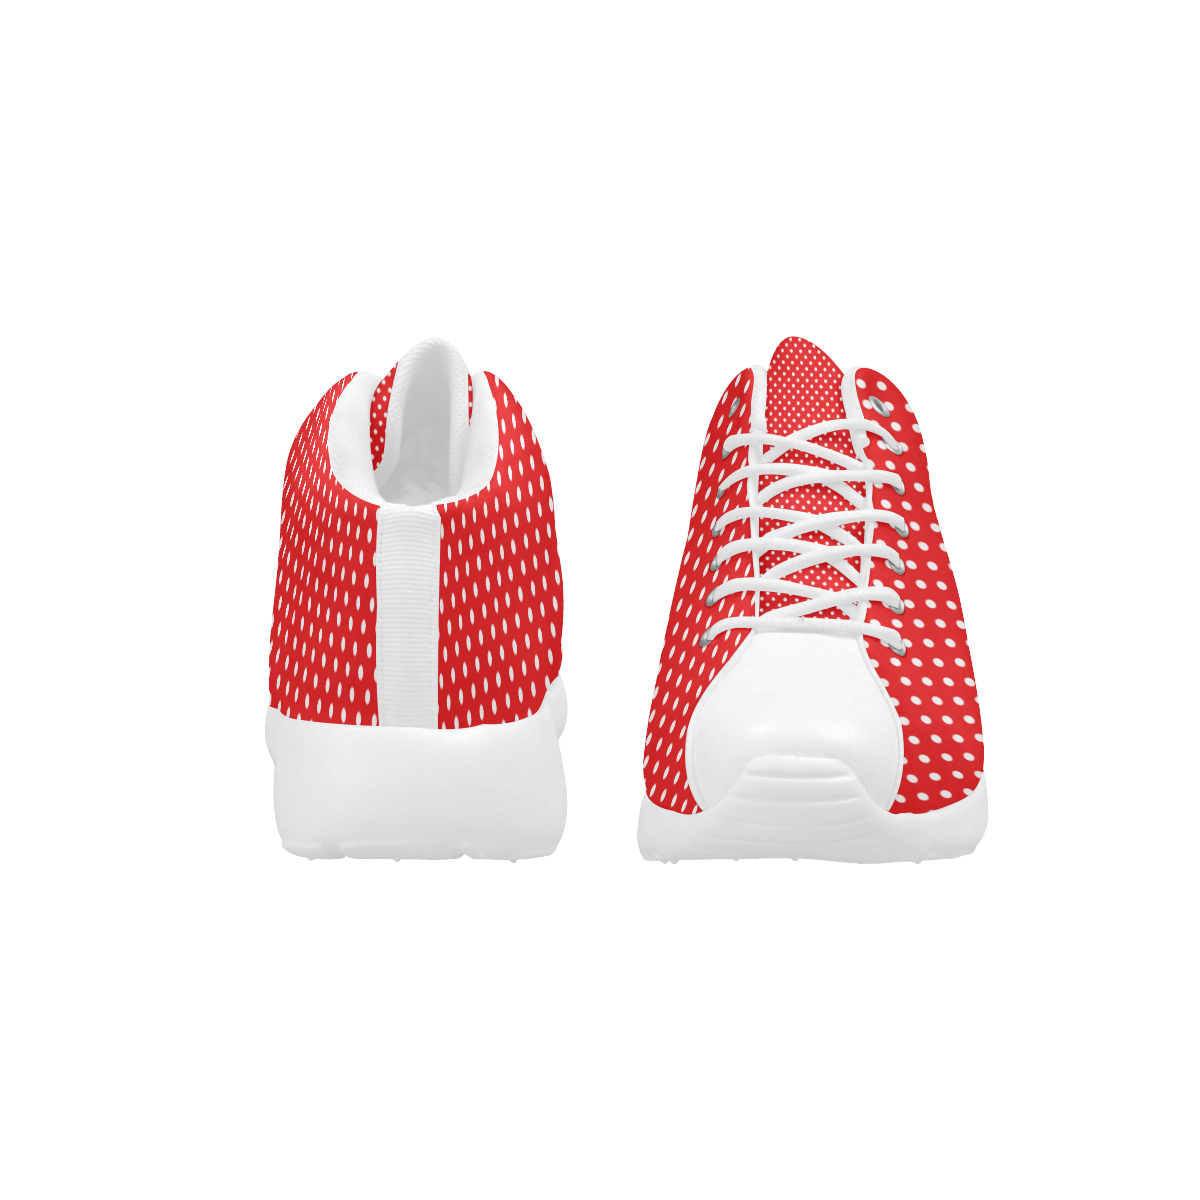 Red polka dots Women's Basketball Training Shoes (Model 47502)